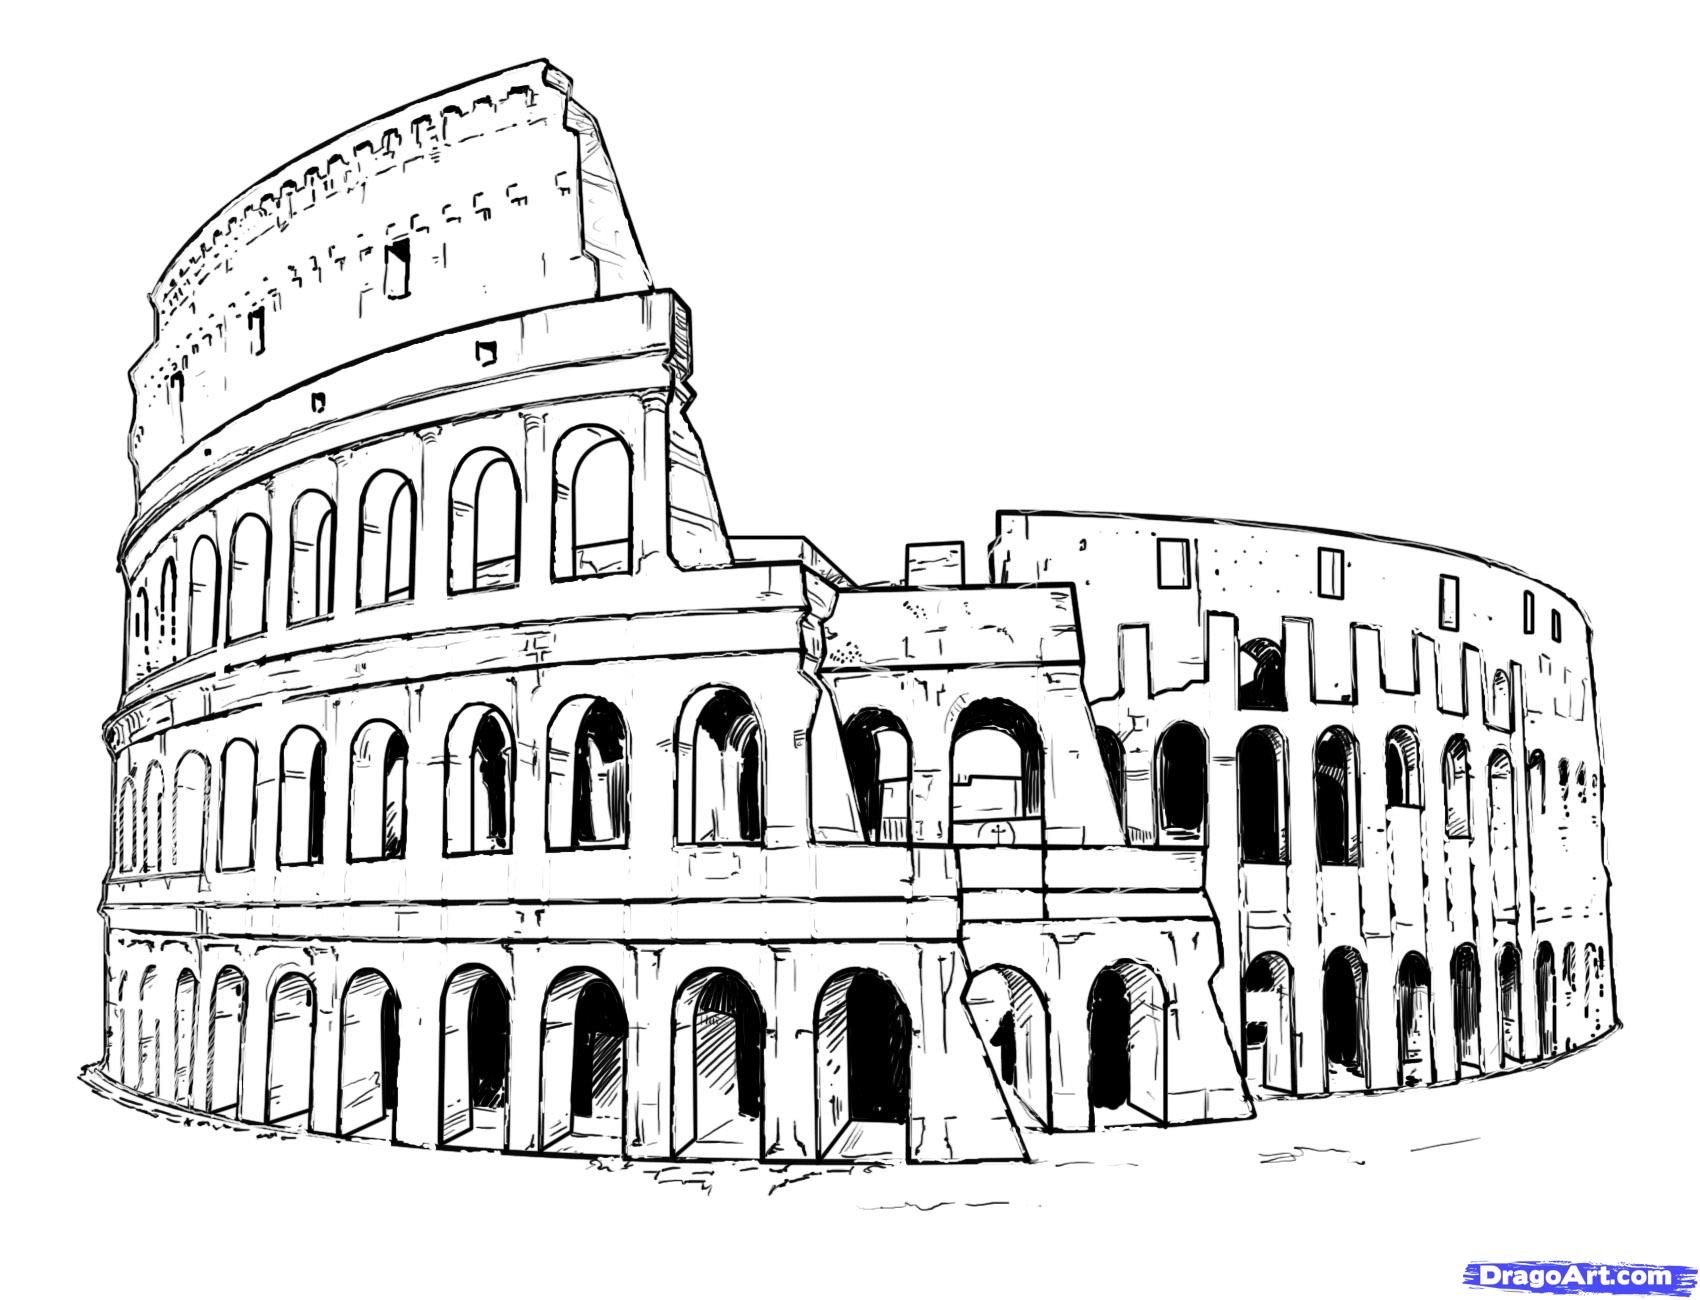 Colosseum Drawing Amazing